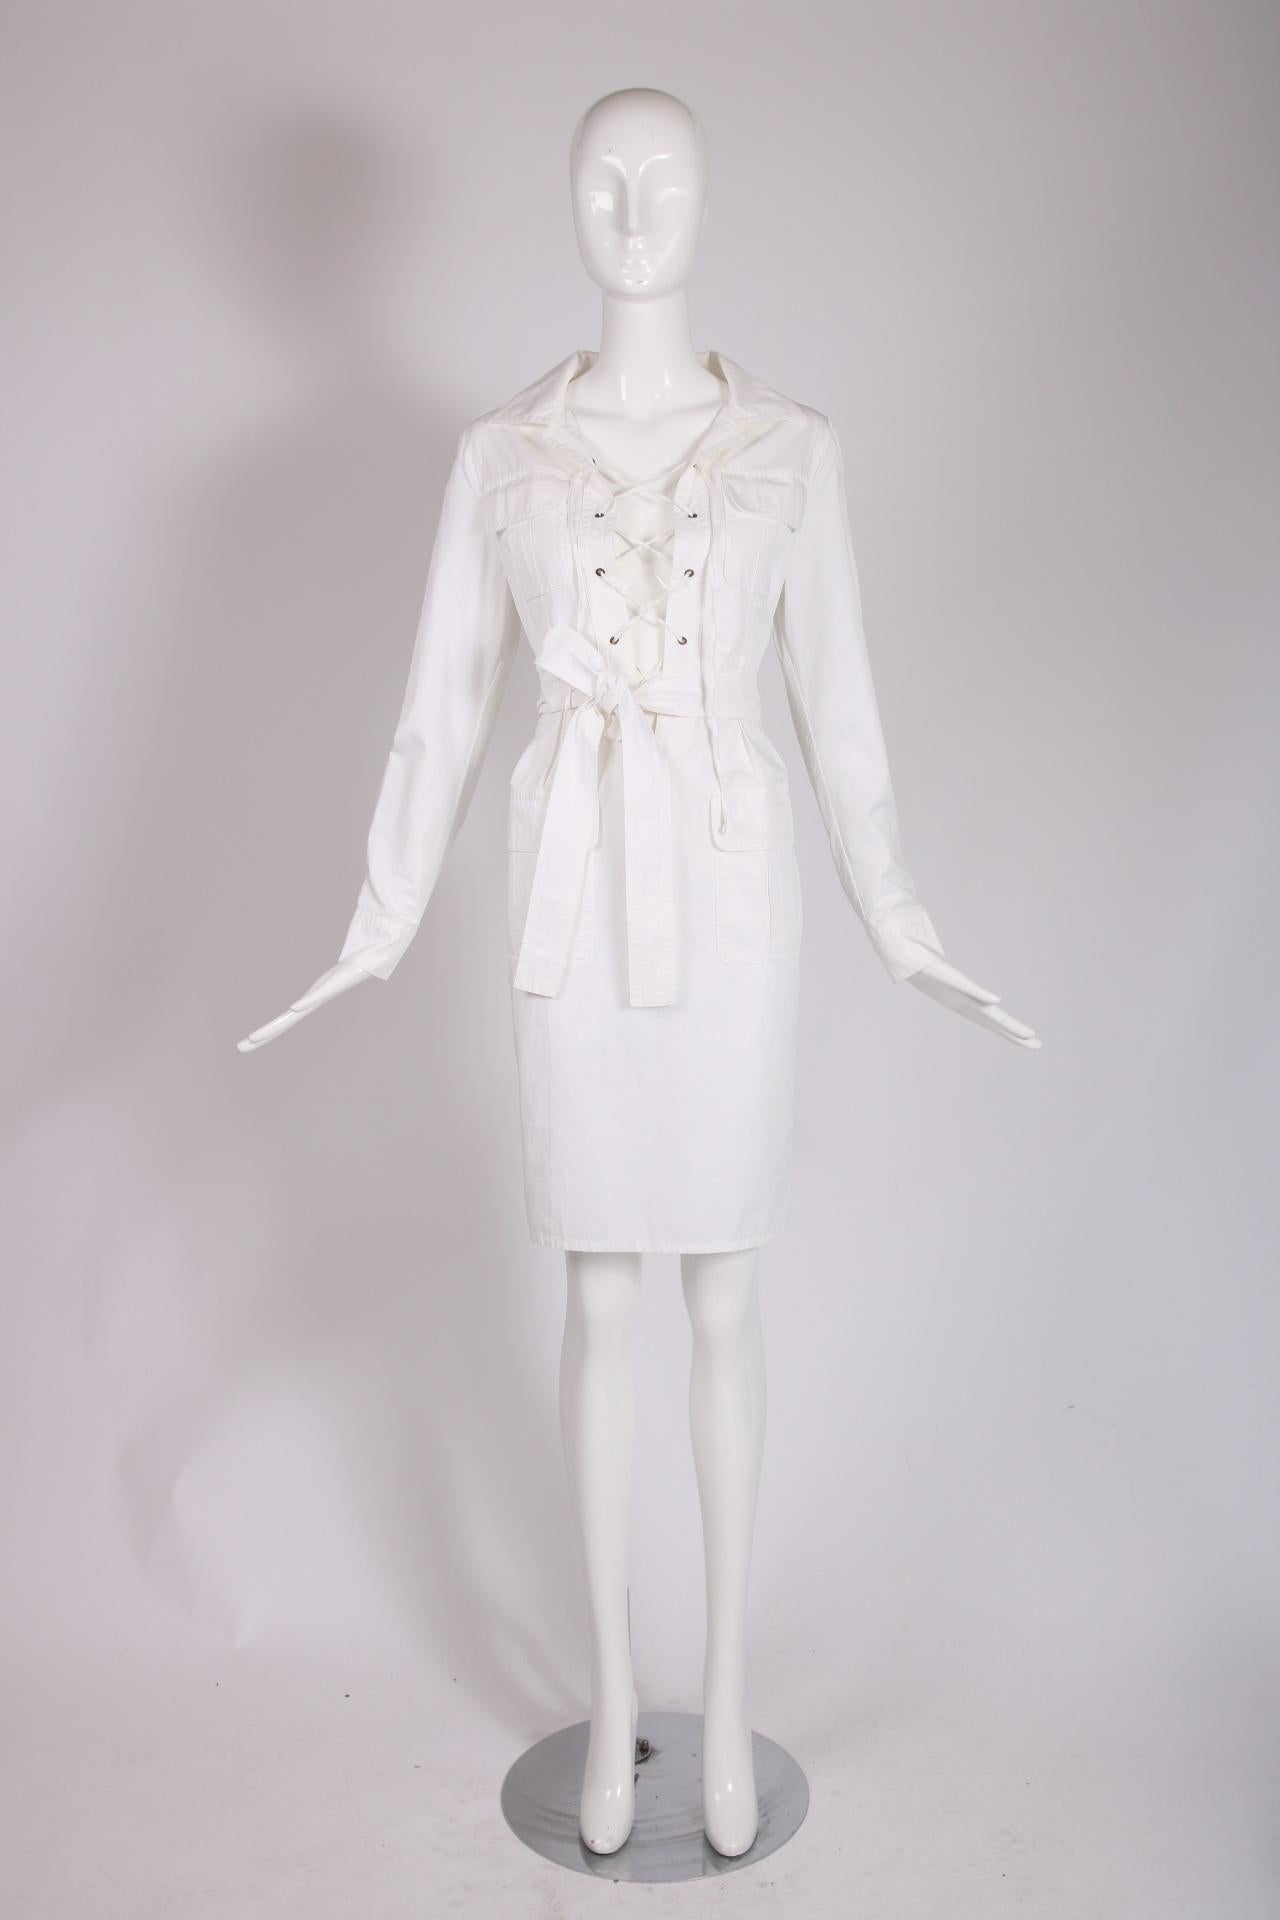 Ca. 2002 YSL by Tom Ford white cotton 'Safari' dress with a lace up front, four frontal pockets and a matching detachable belt. Size tag 36, 100% cotton. In excellent condition.

Shoulders: 16